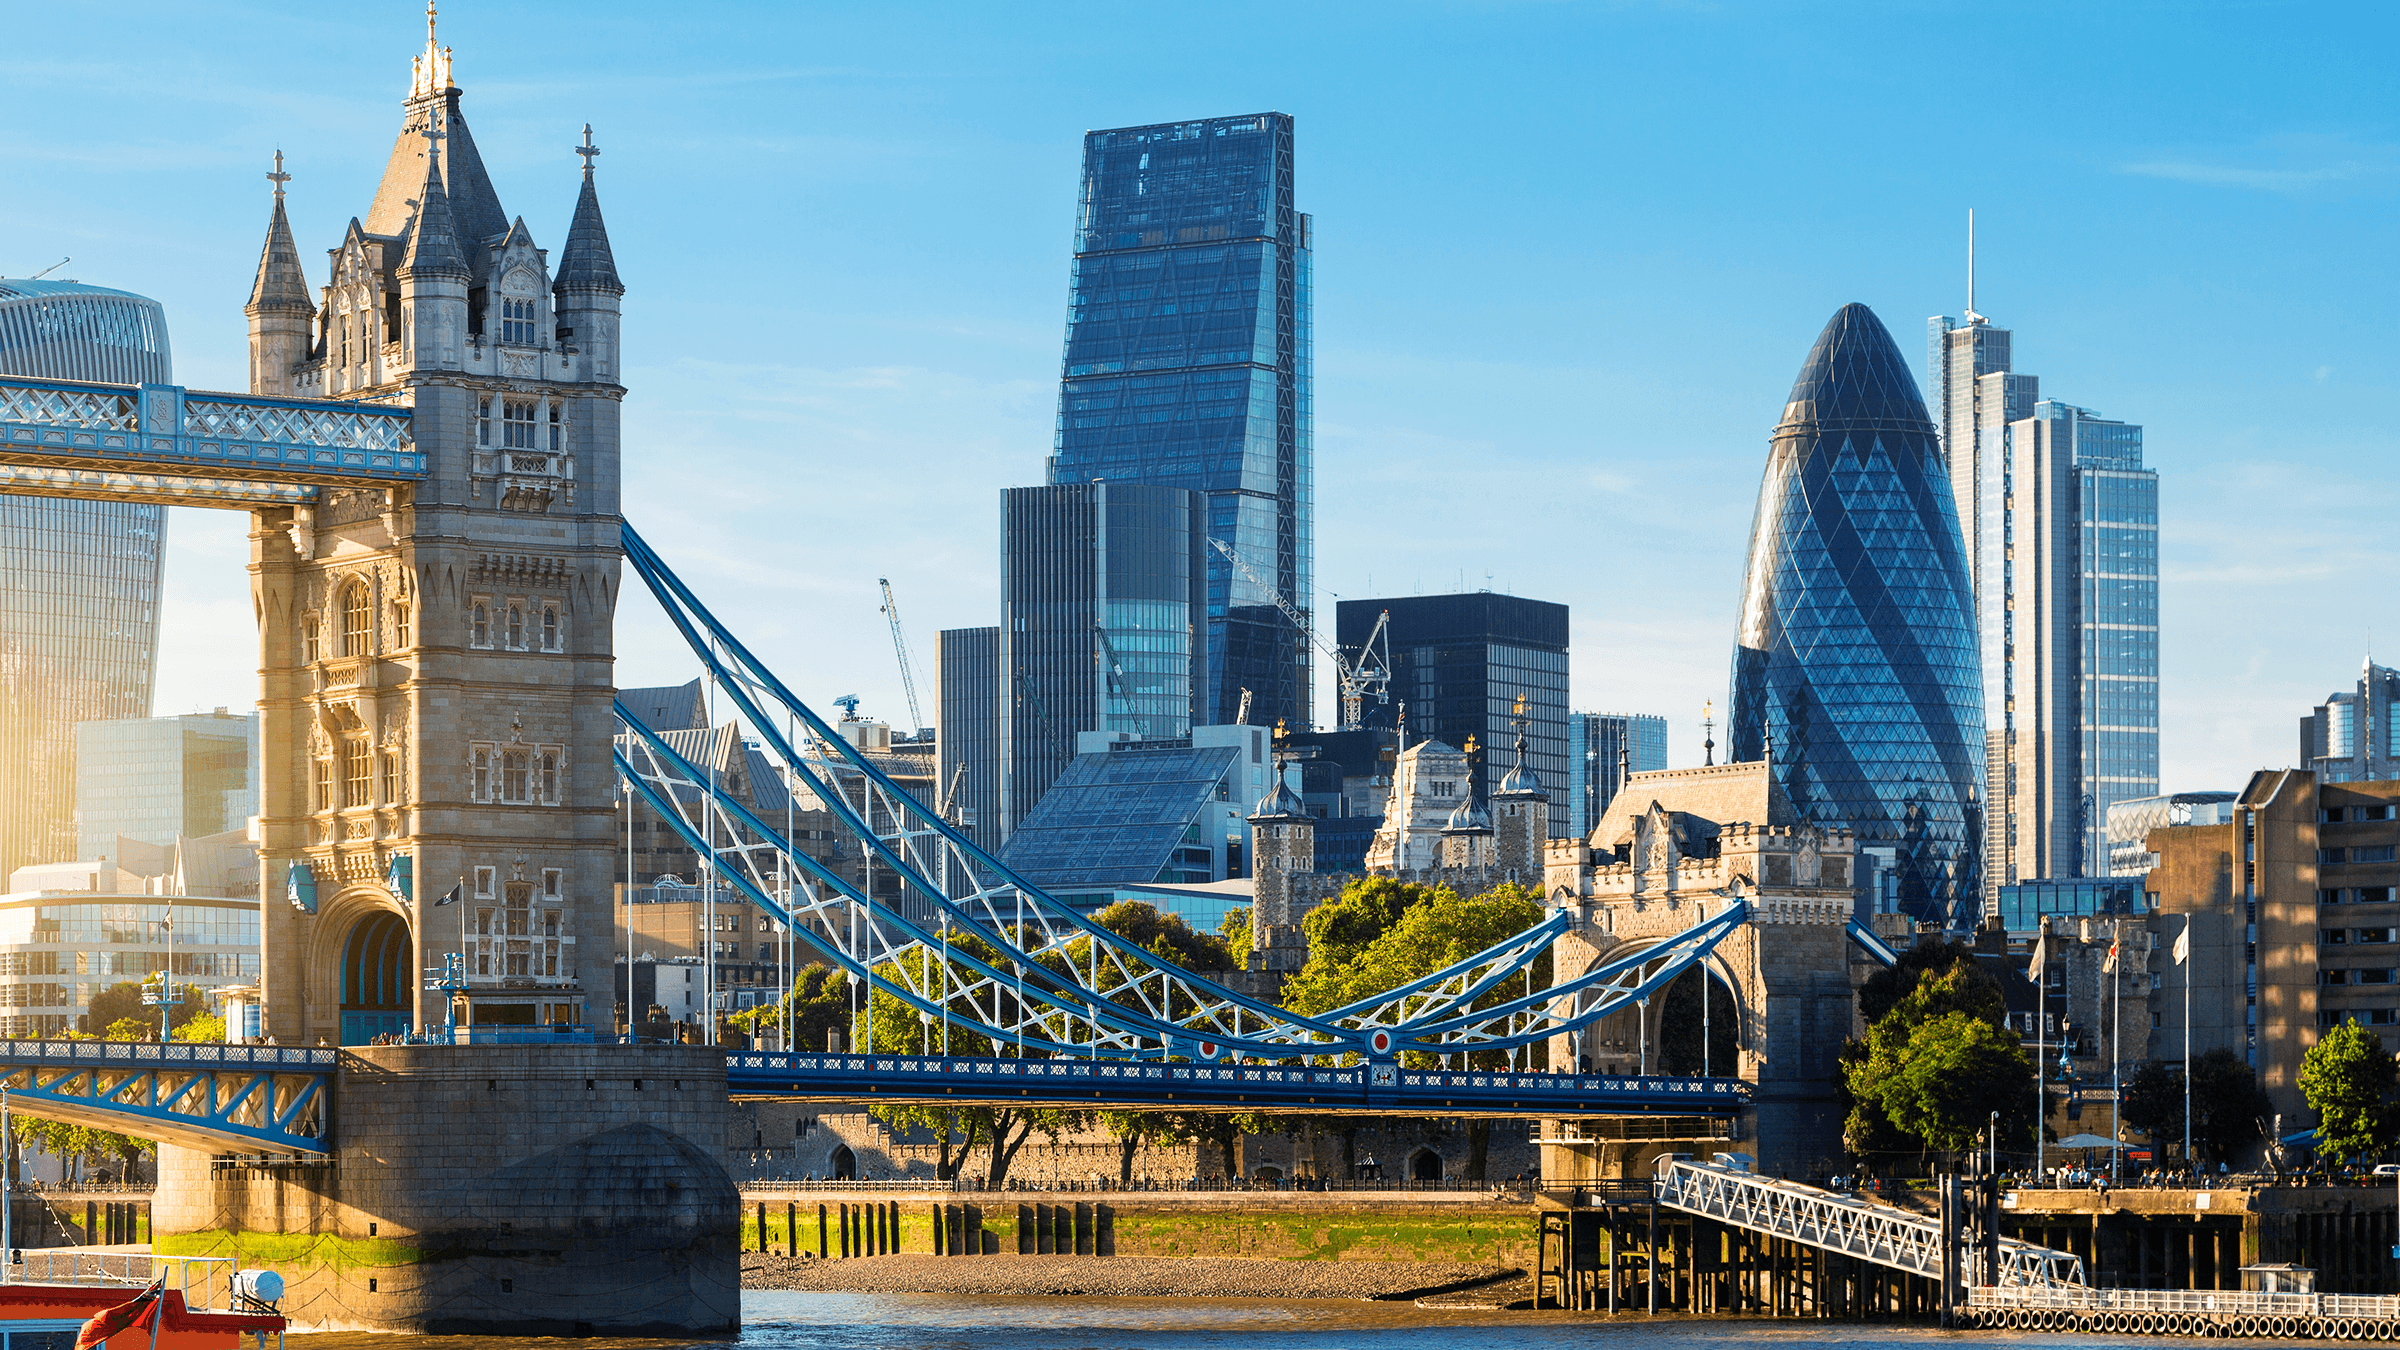 an image of the City of London skyline with Tower Bridge in the foreground